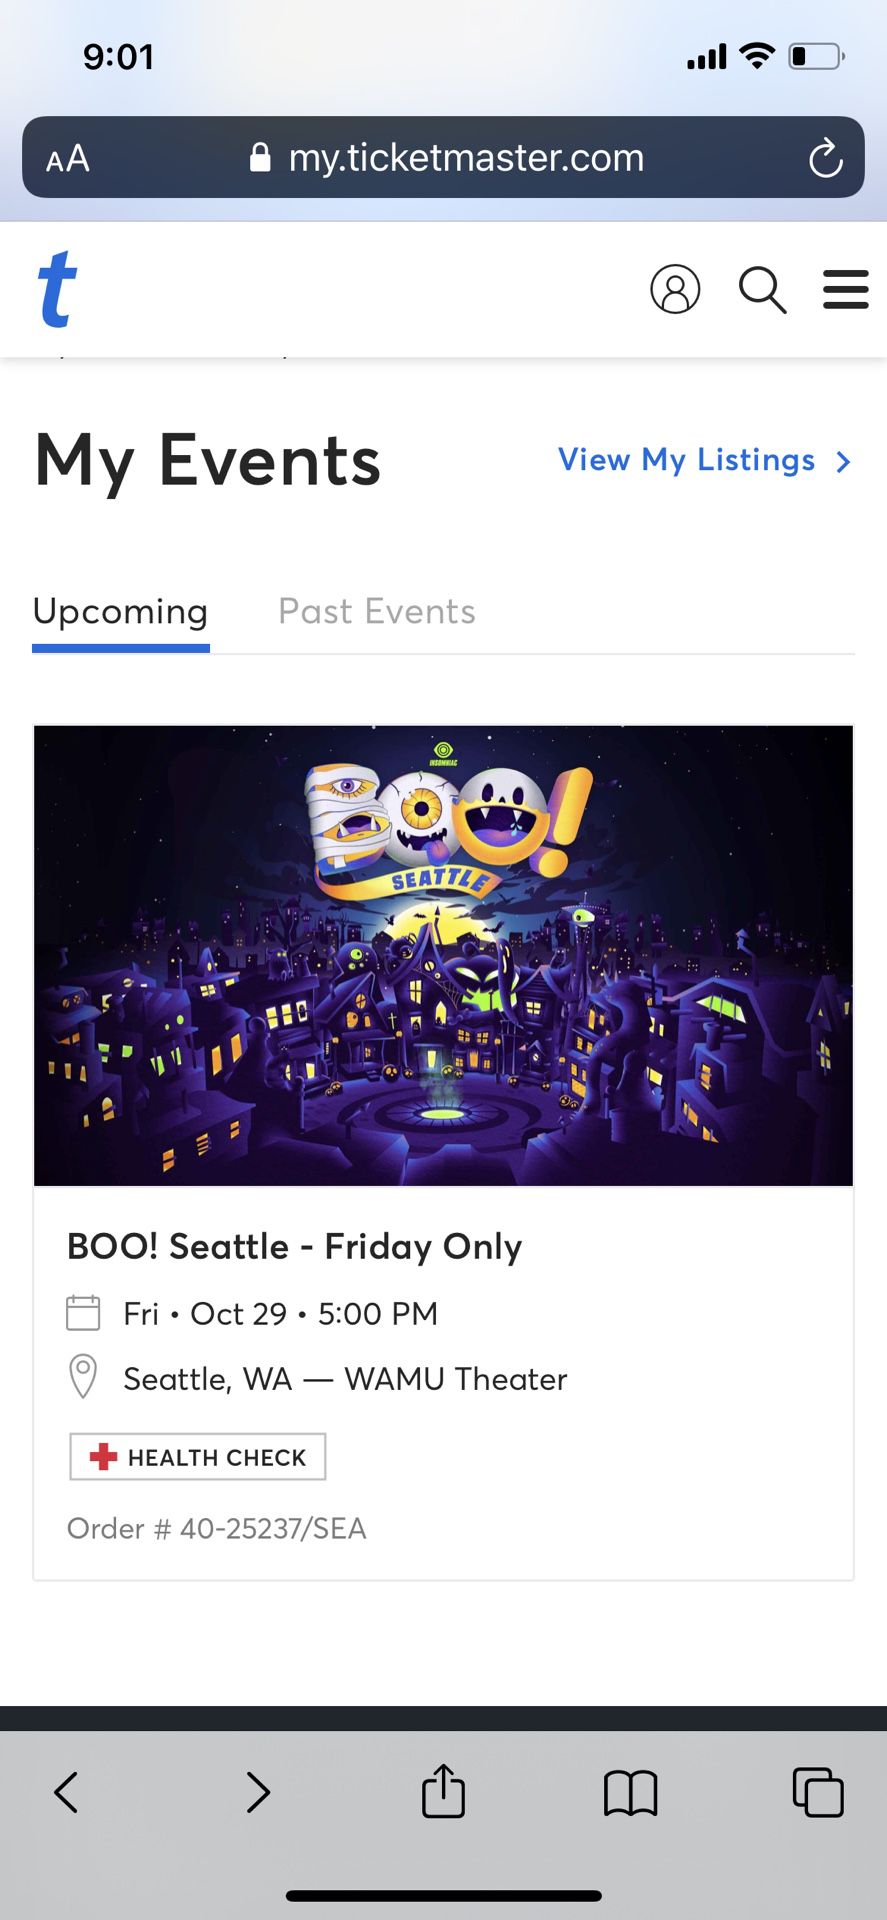 Boo! Seattle - Enhanced VIP - Friday Only - 2 Tickets $150 Per Ticket  